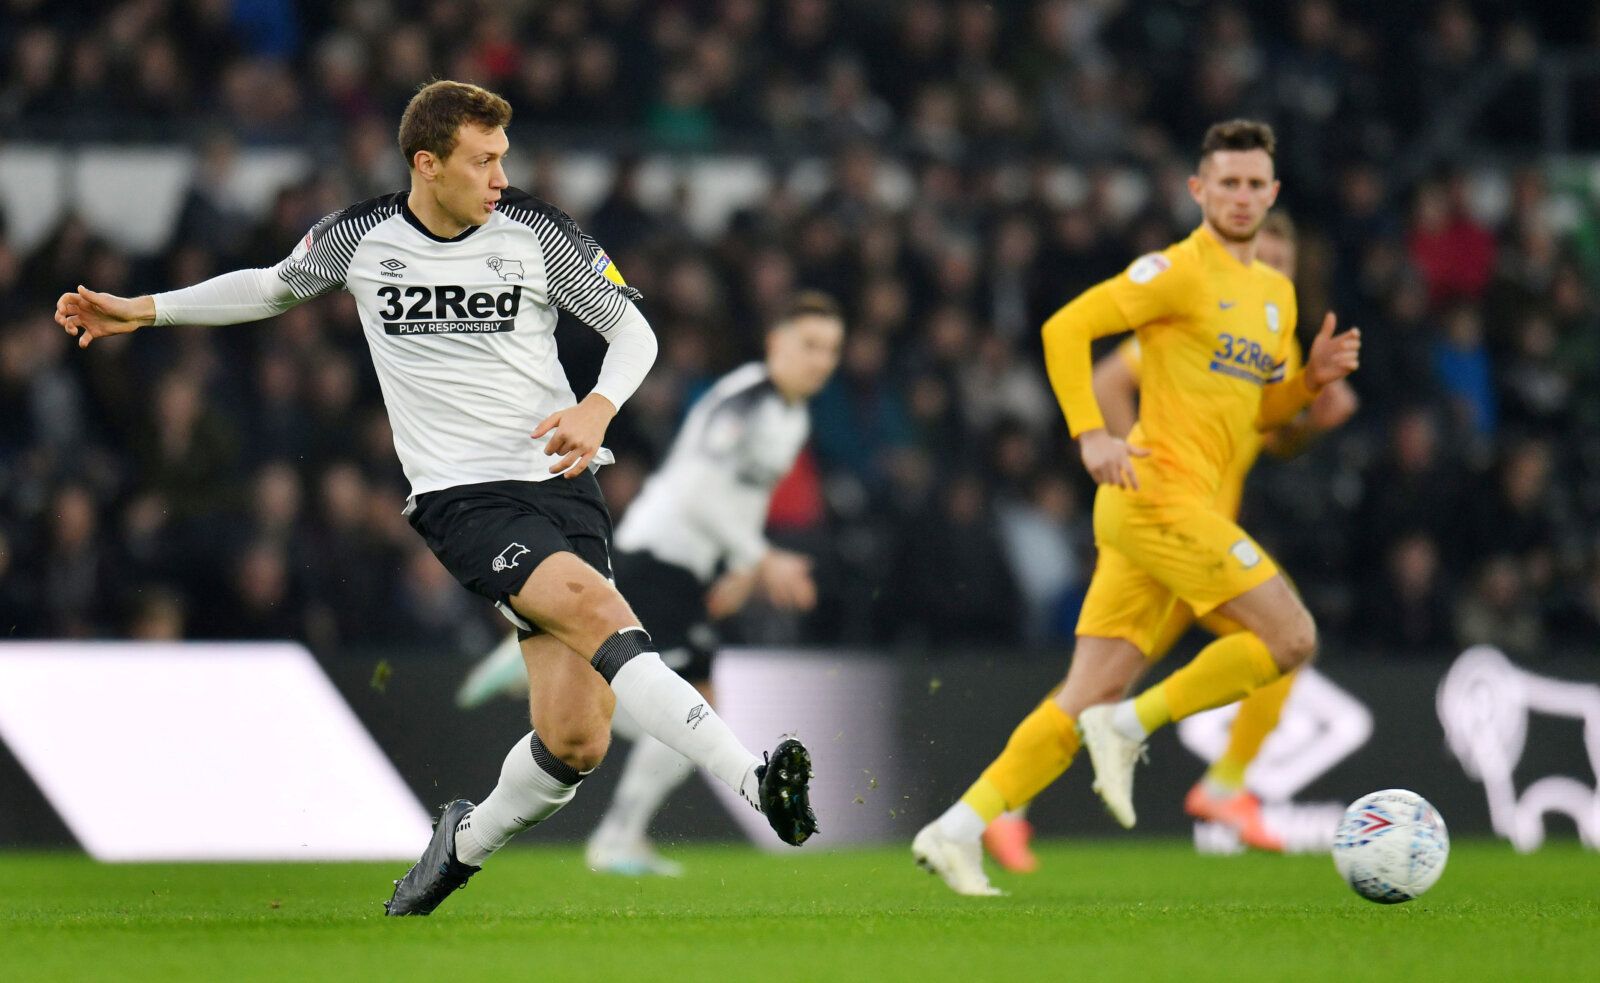 Soccer Football - Championship - Derby County v Preston North End - Pride Park, Derby, Britain - November 23, 2019   Derby County's Krystian Bielik in action    Action Images/Paul Burrows    EDITORIAL USE ONLY. No use with unauthorized audio, video, data, fixture lists, club/league logos or 